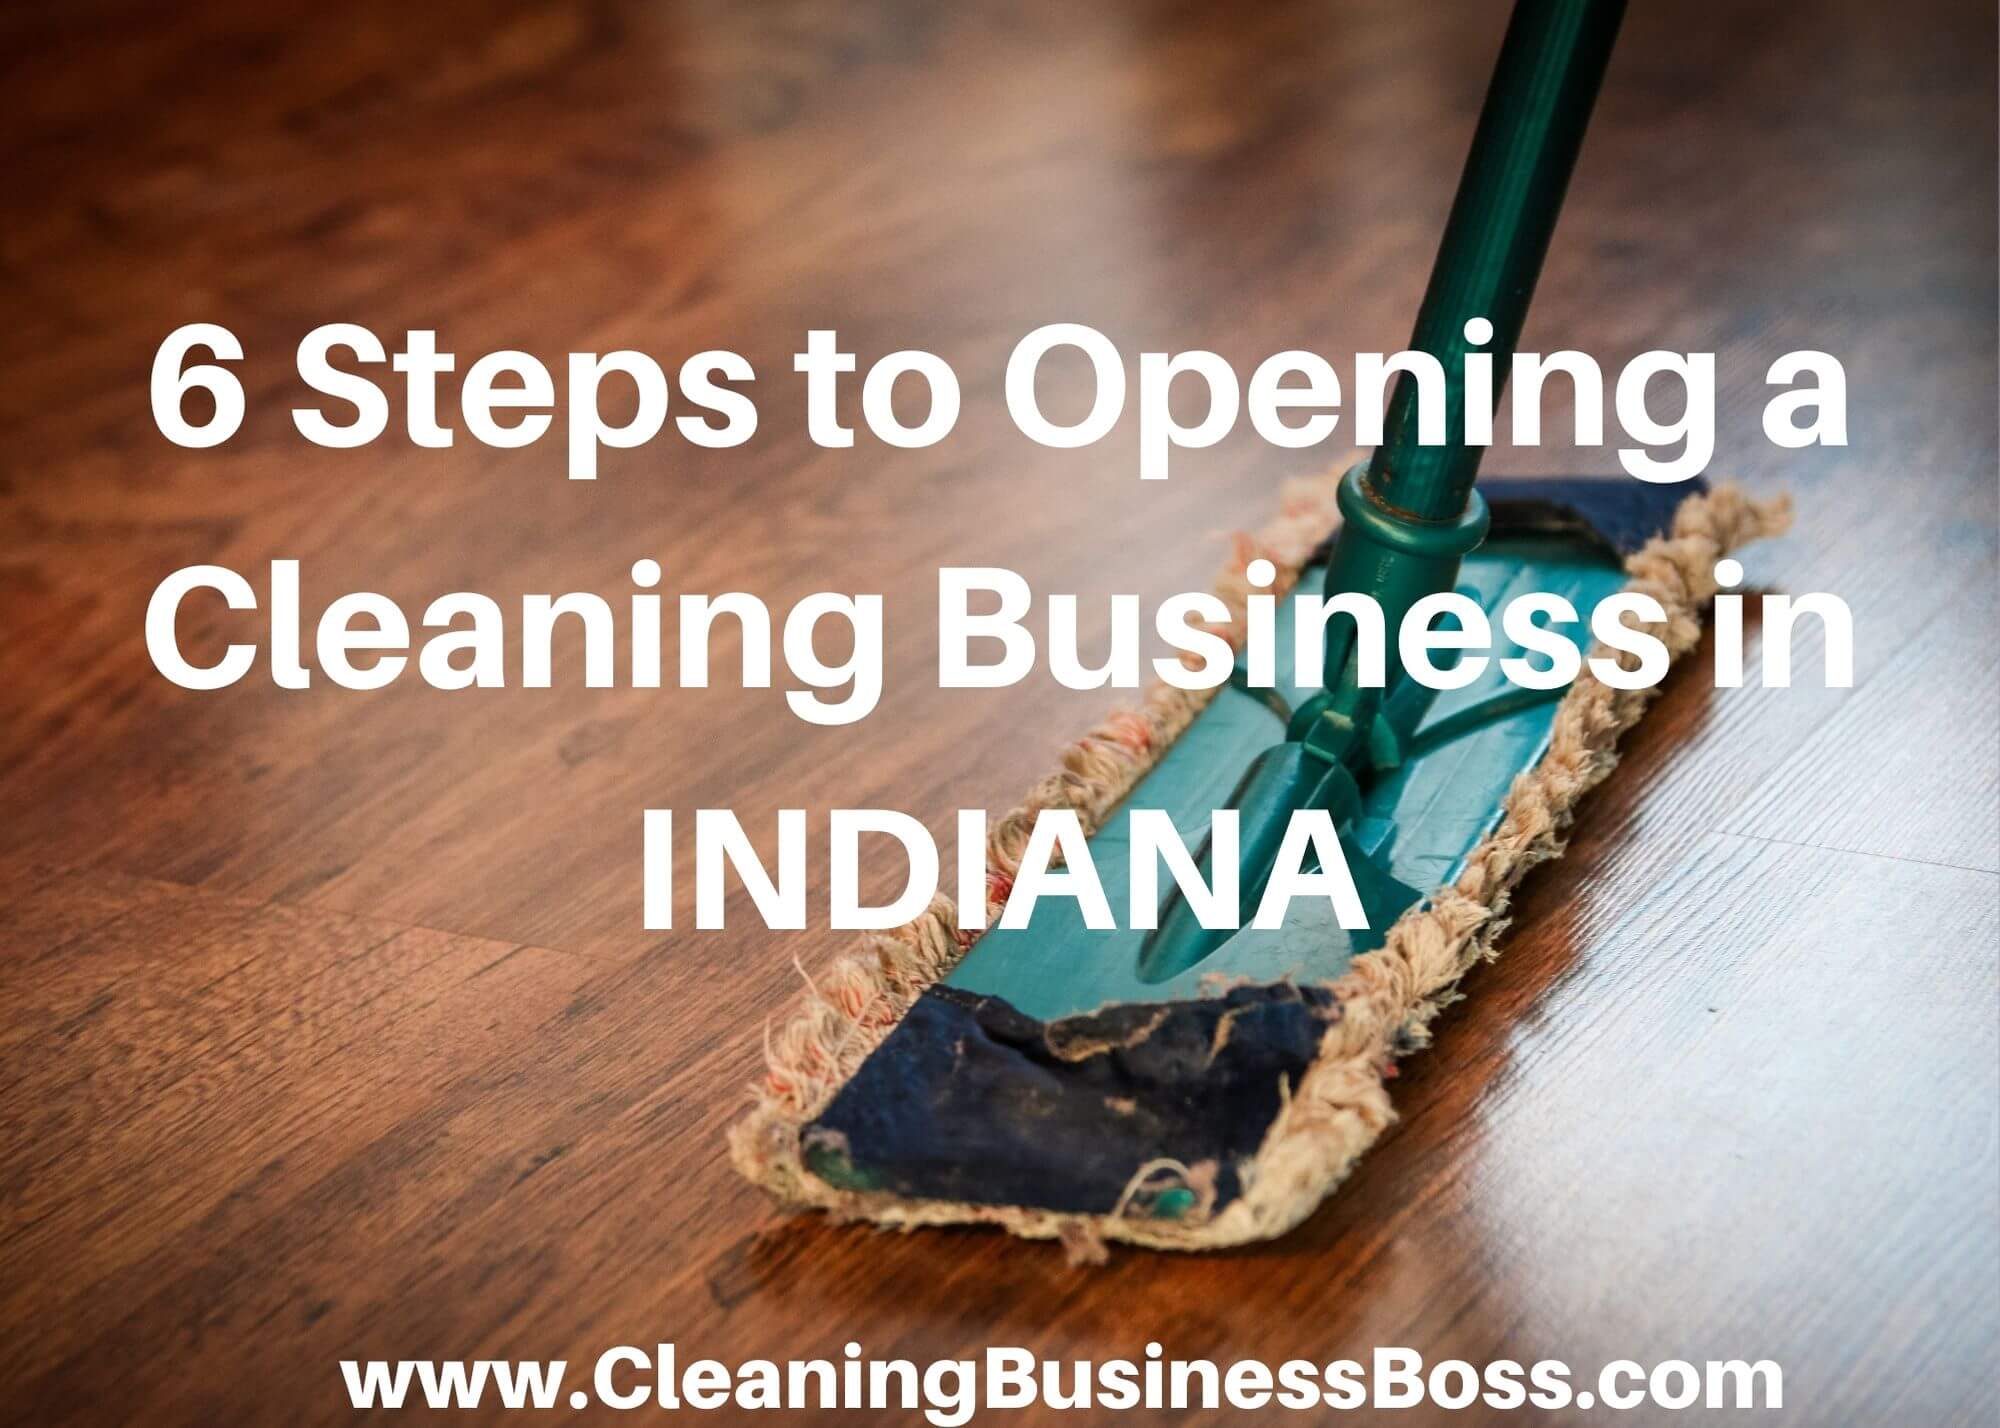 6 Steps to Opening a Cleaning Business in Indiana